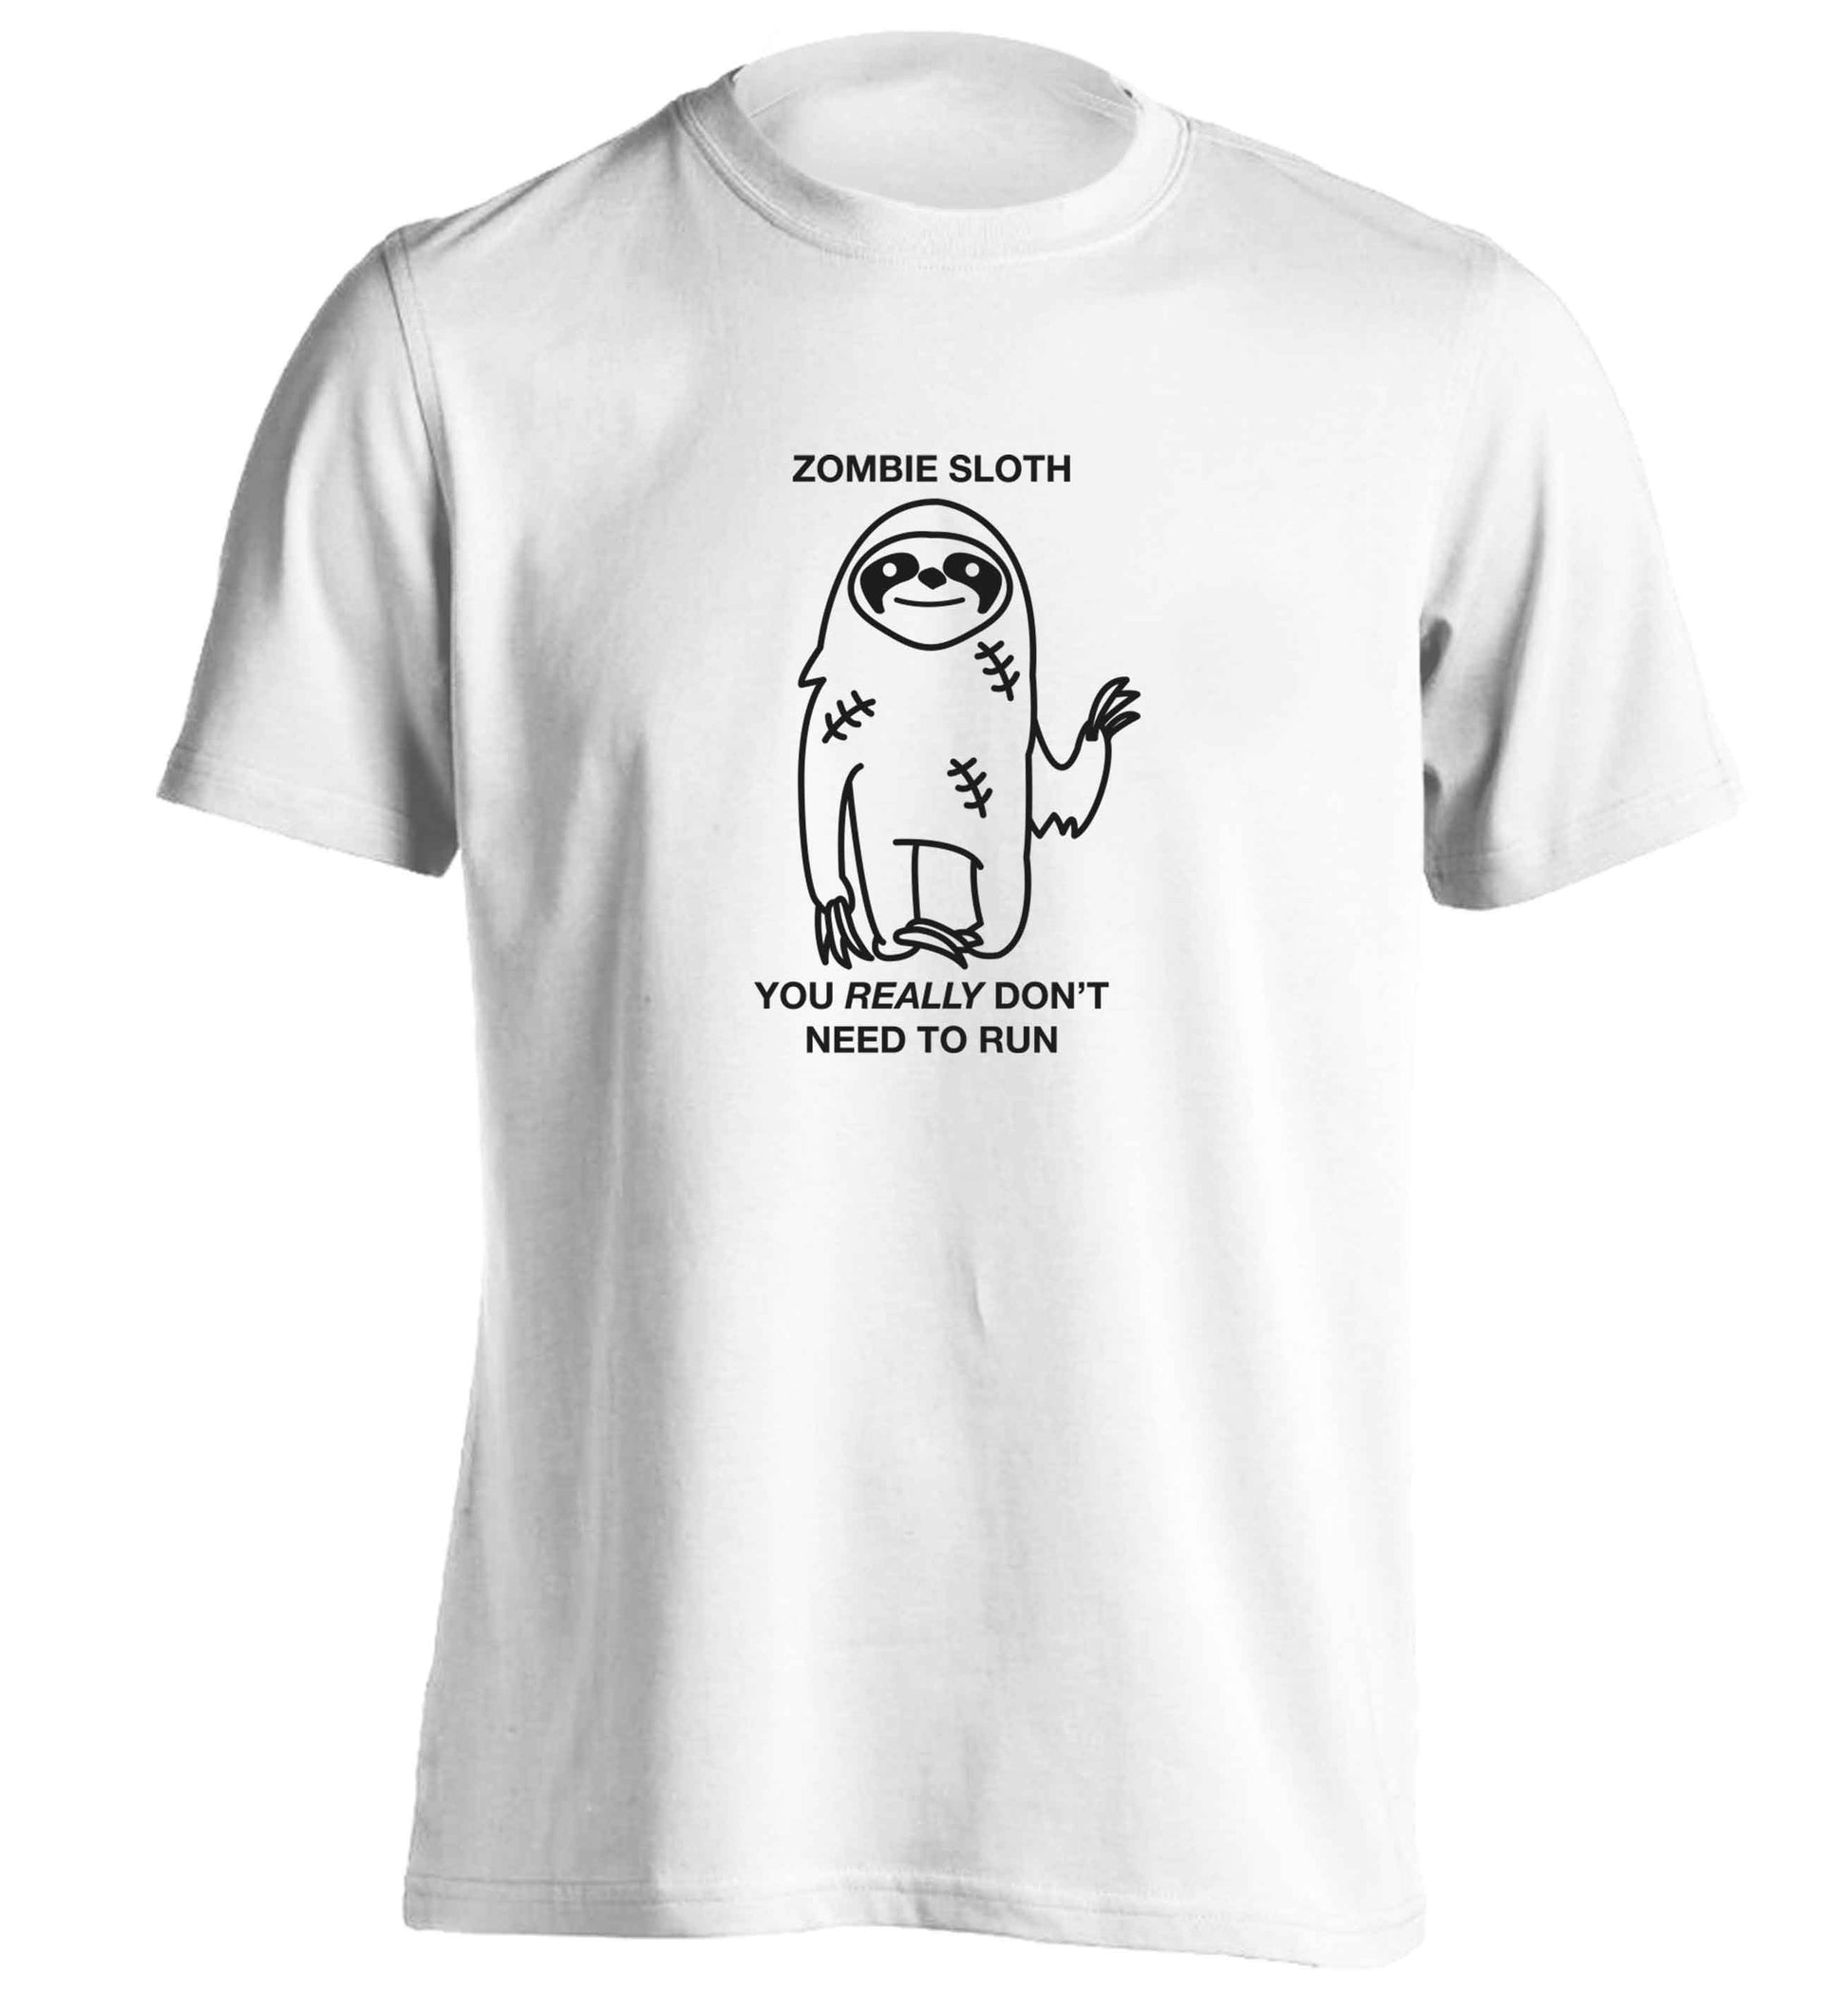 Zombie sloth you really don't need to run adults unisex white Tshirt 2XL